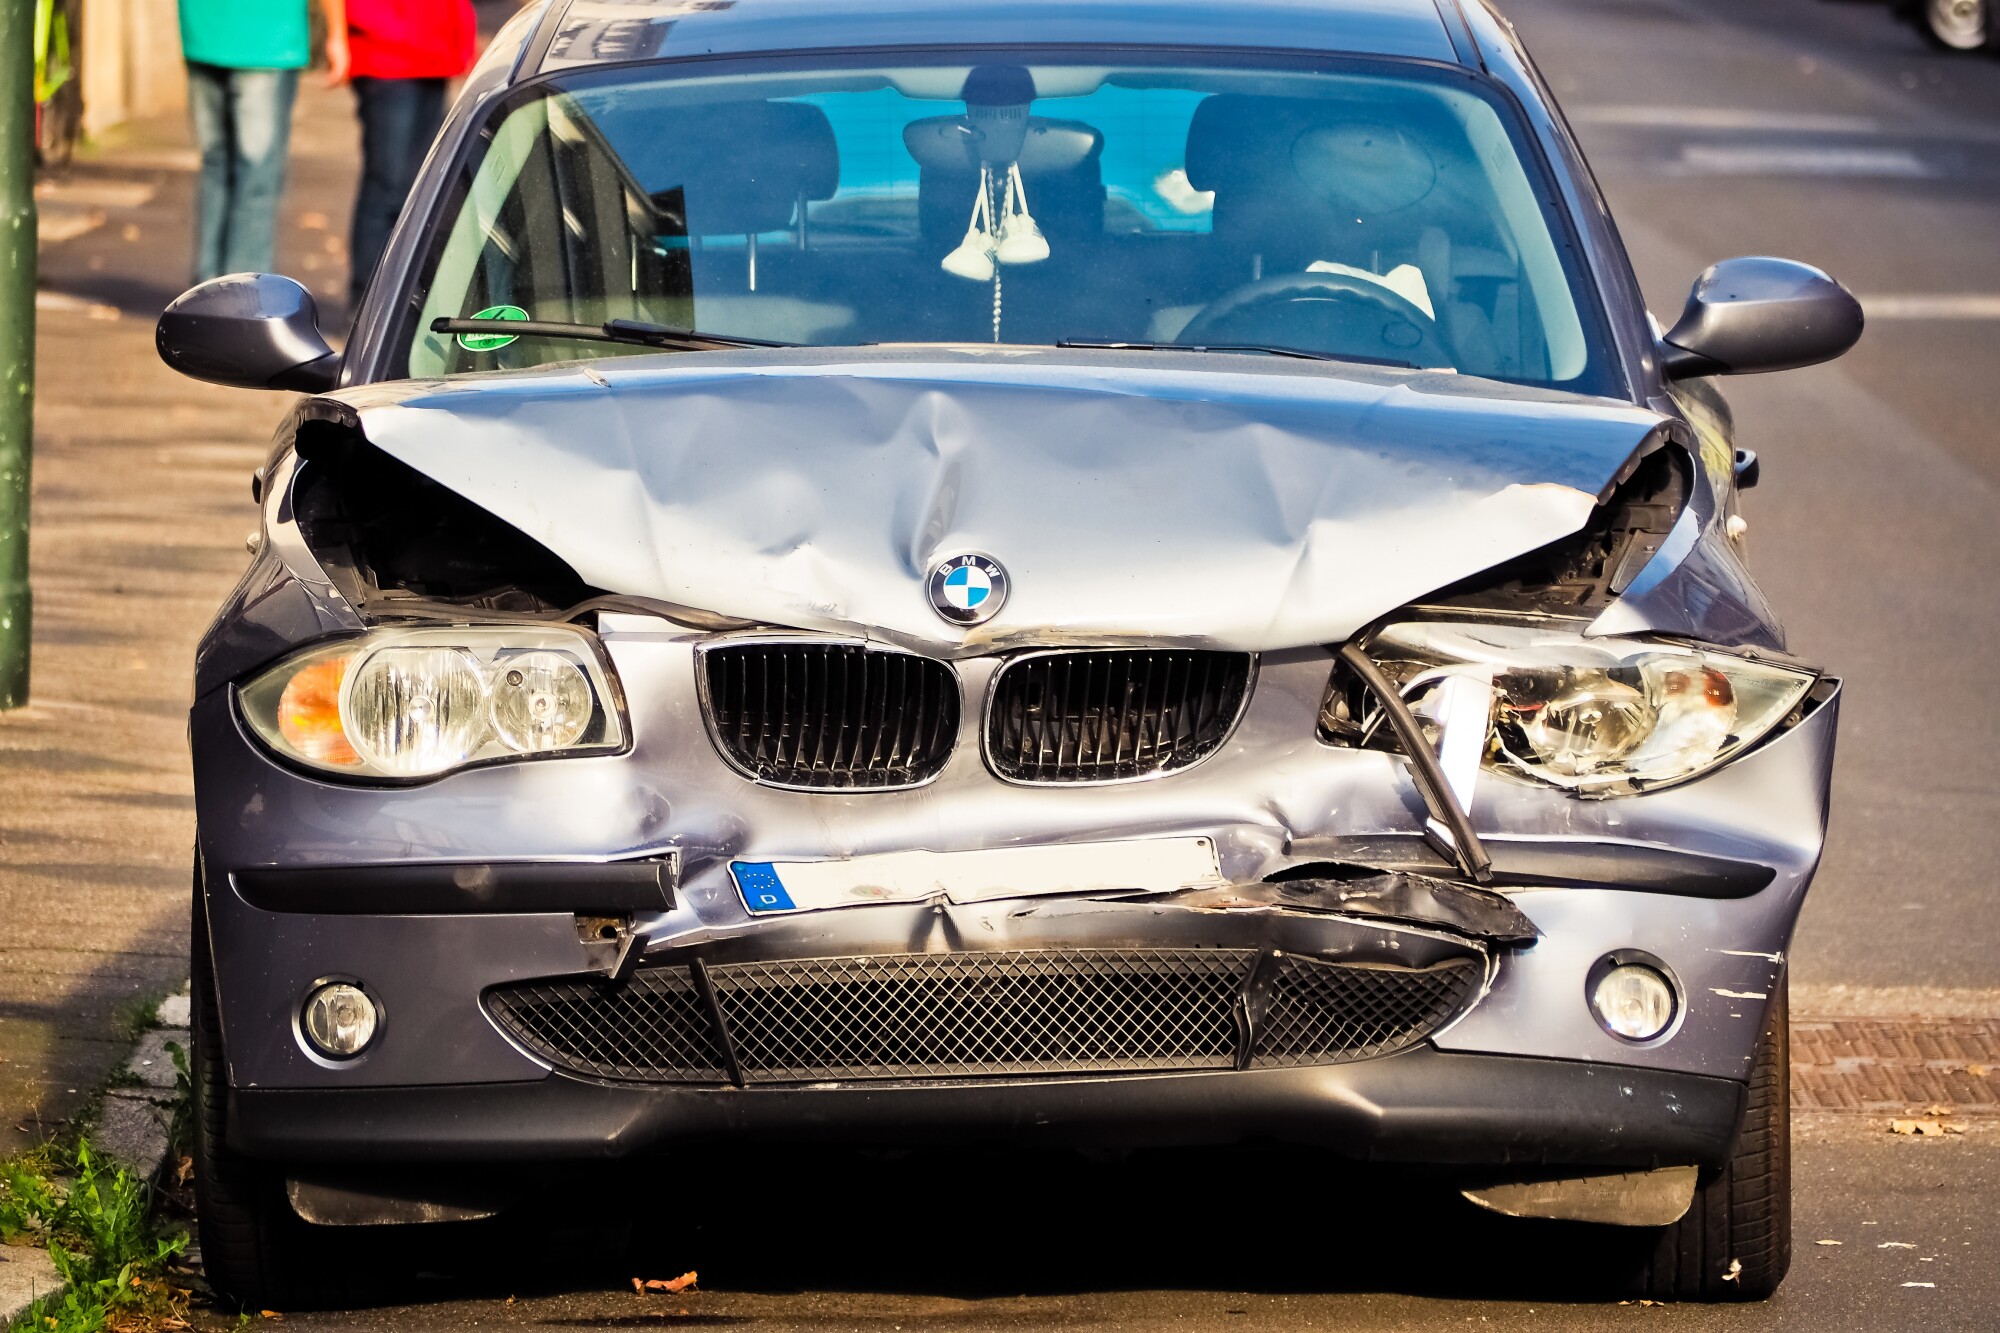 Automobile Accident Lawyers Near Me